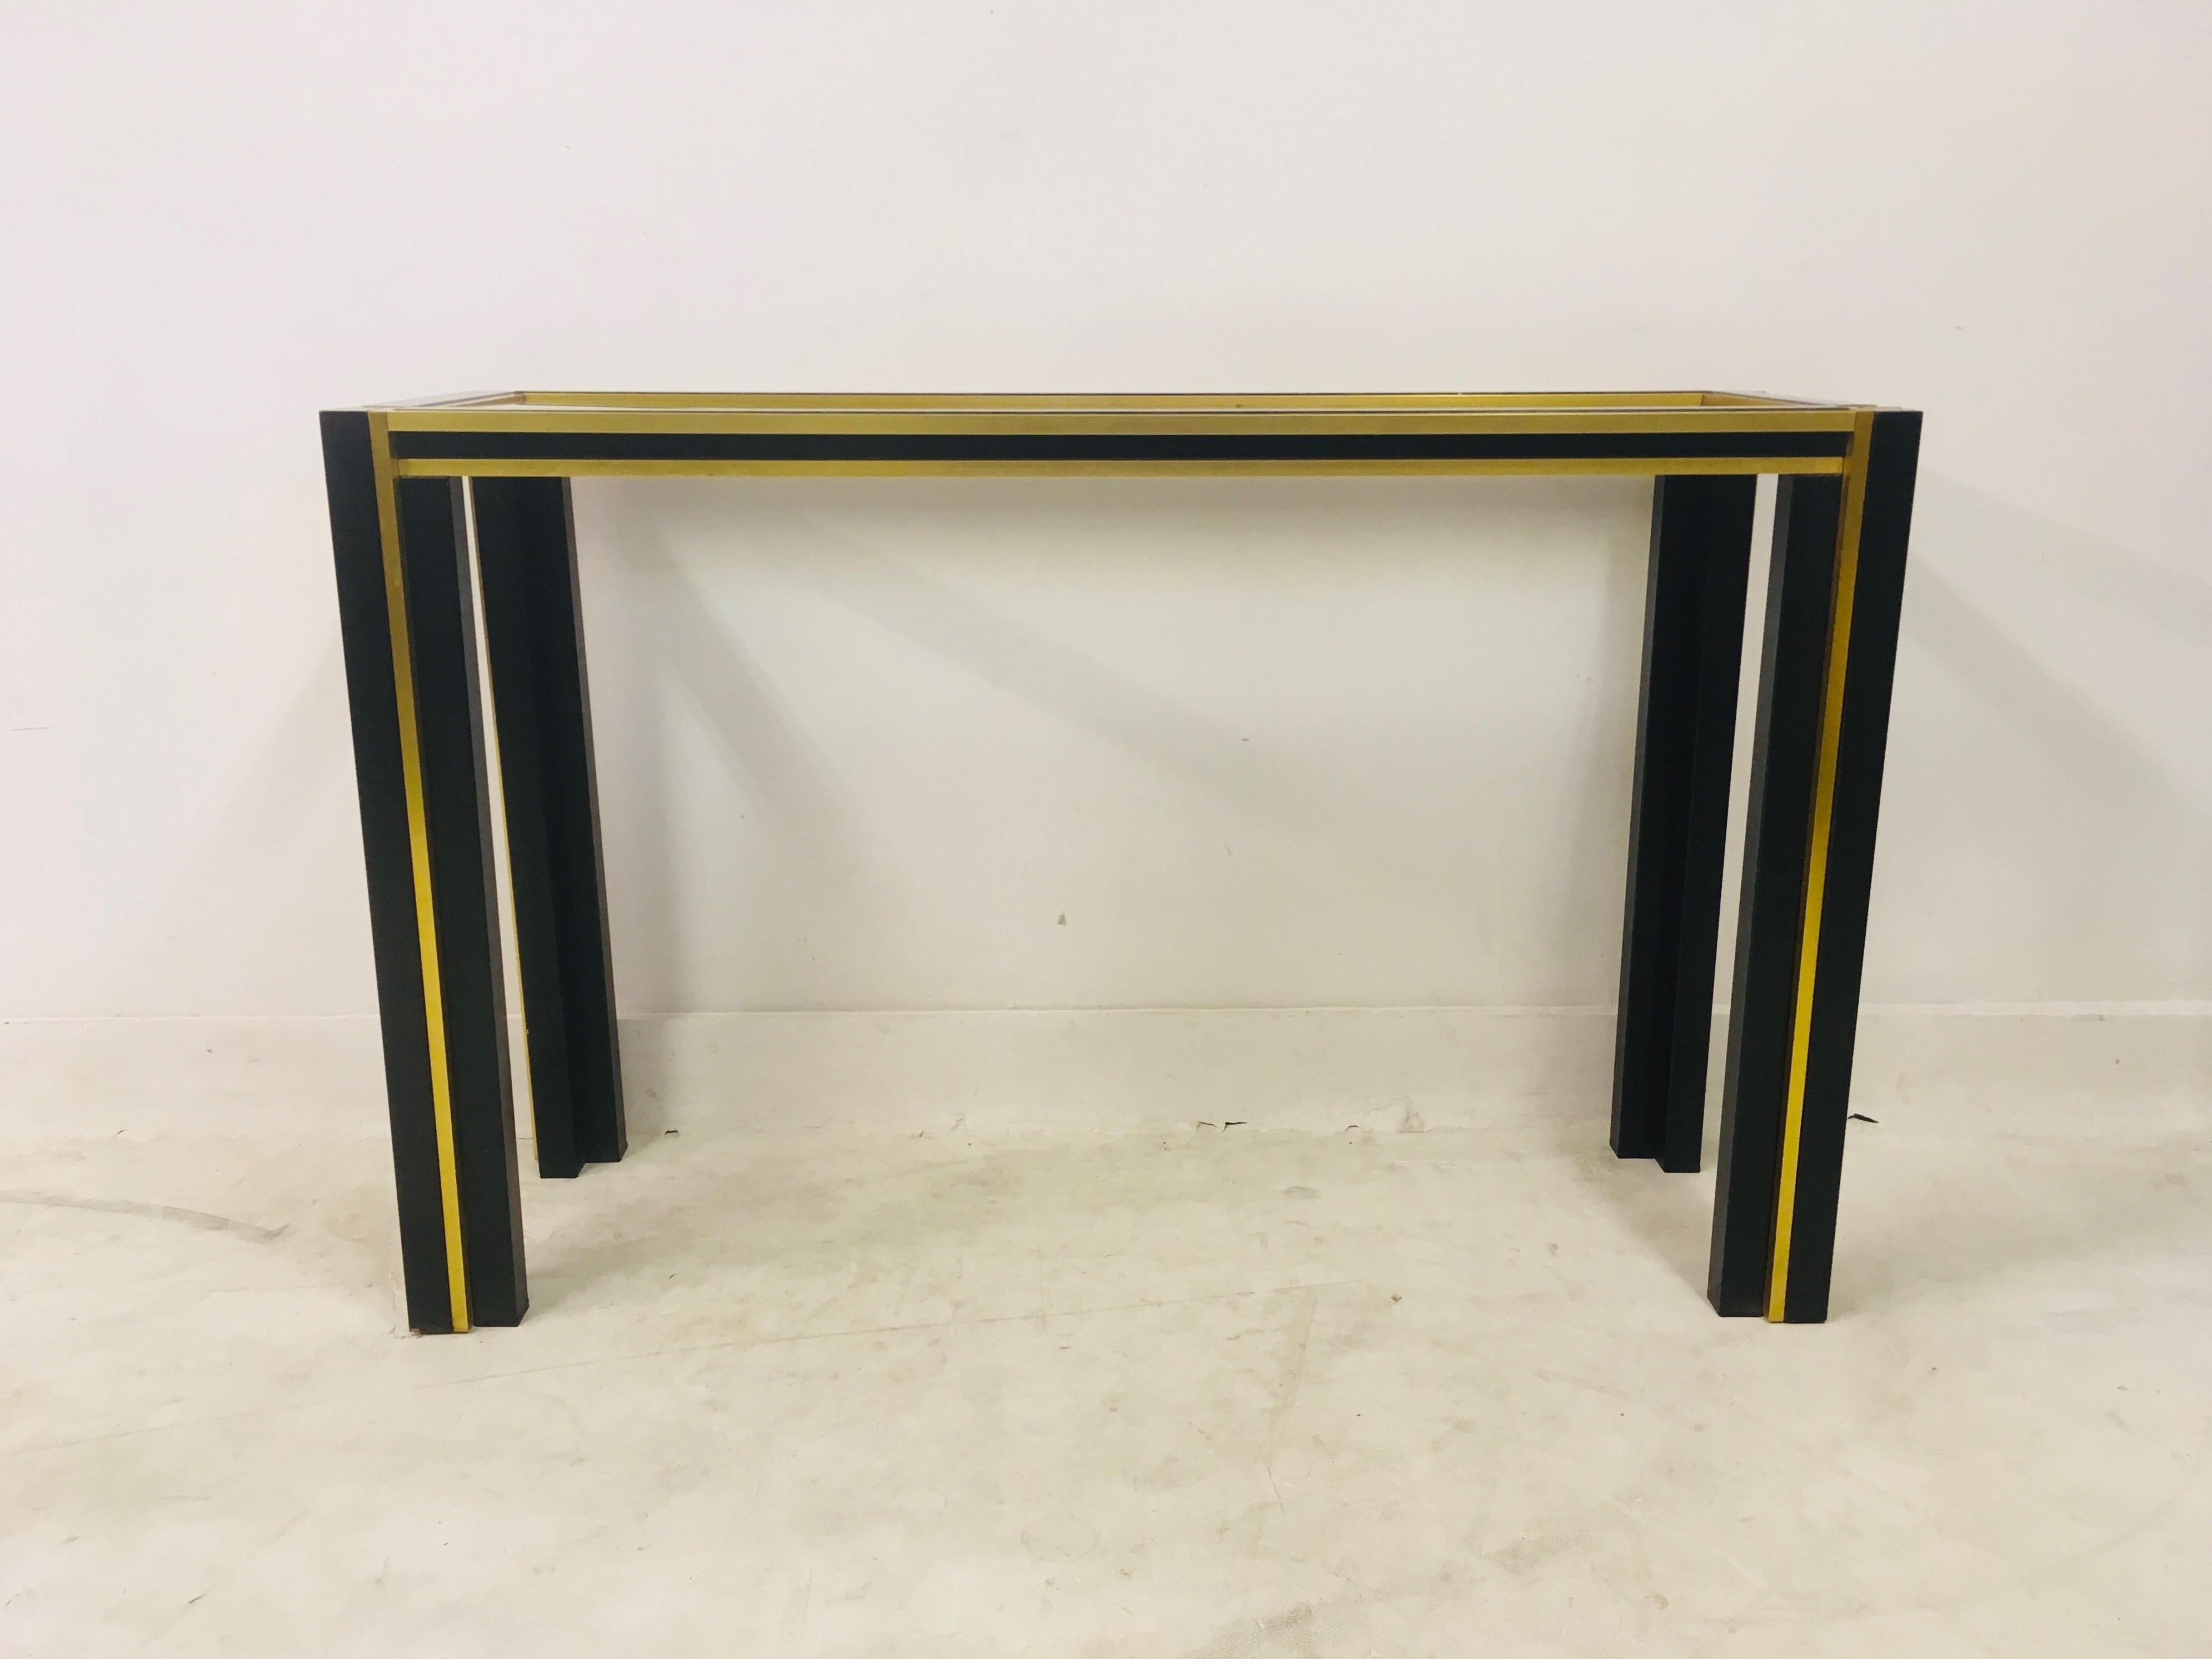 Vintage 1970s Italian Brass and Black Metal Console Table and Mirror In Fair Condition For Sale In London, London